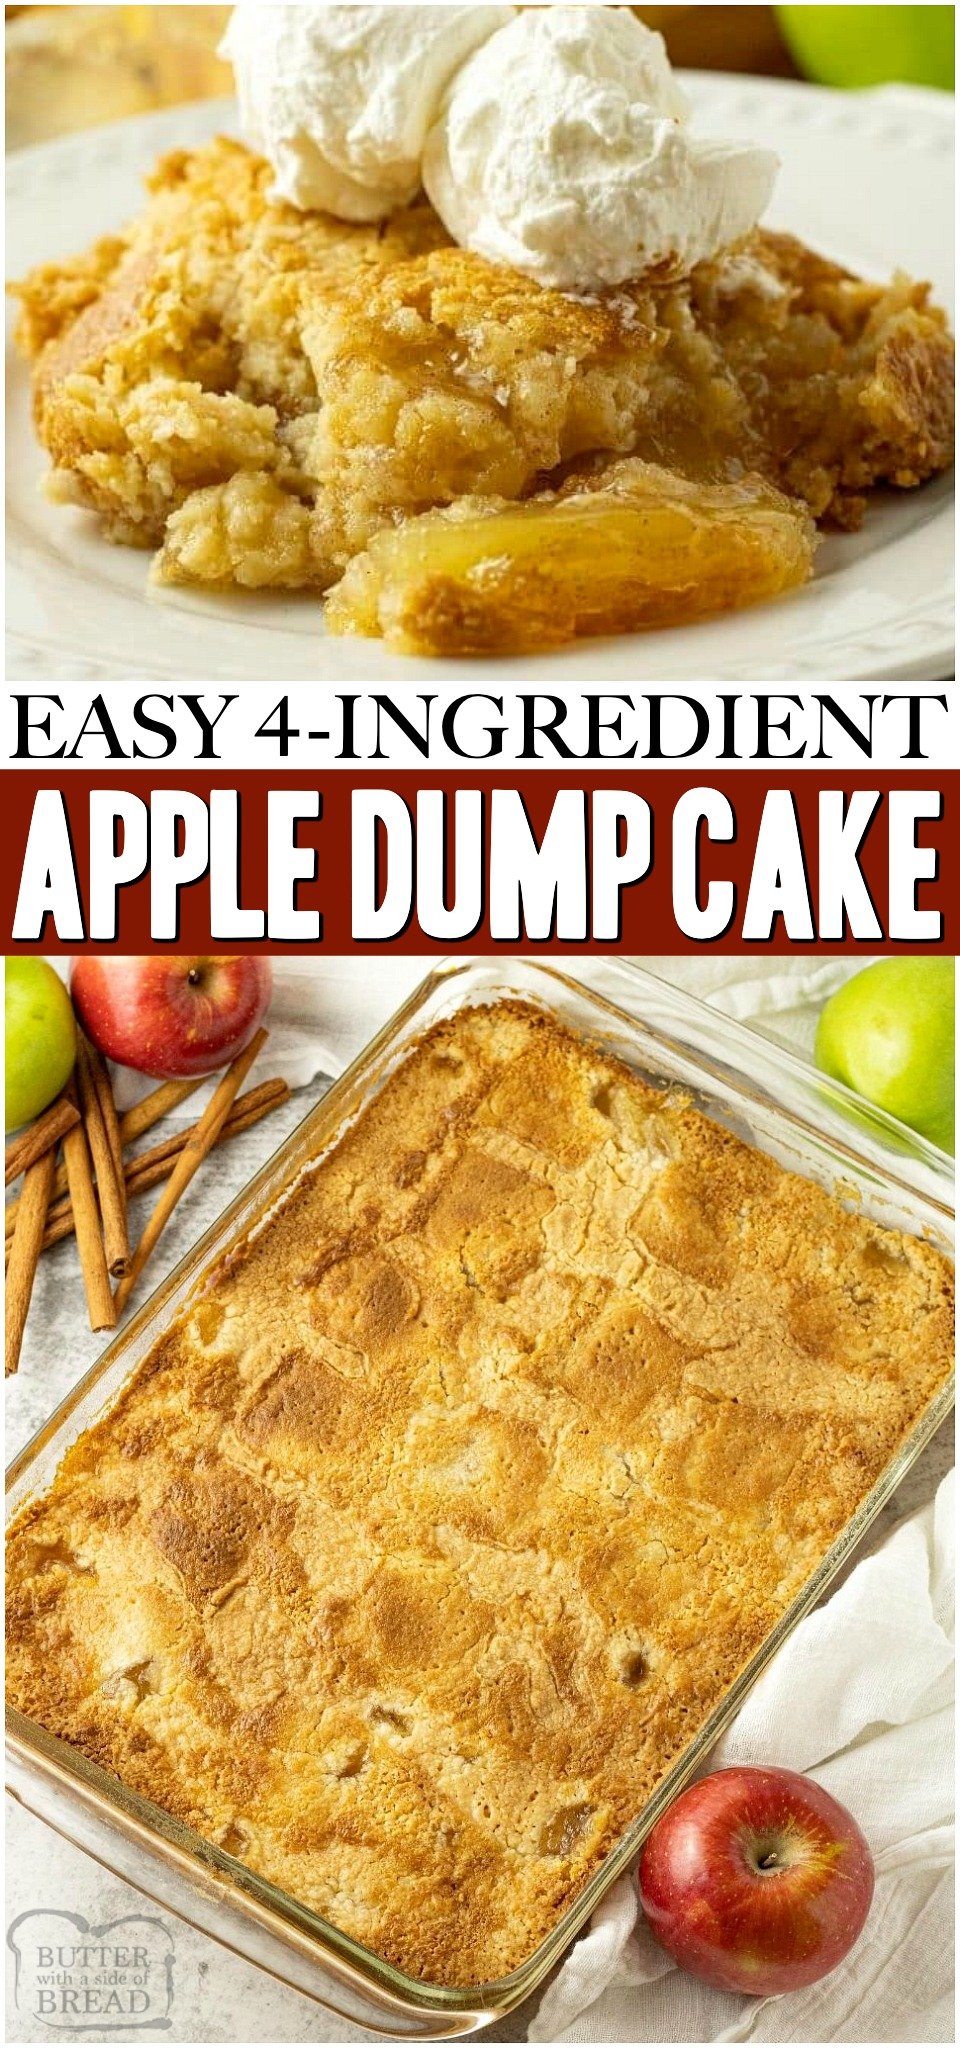 Easy Apple Dump Cake recipe with just 4 simple pantry ingredients! Cake mix & apple pie filling transform into a delicious apple dessert perfect for any occasion.